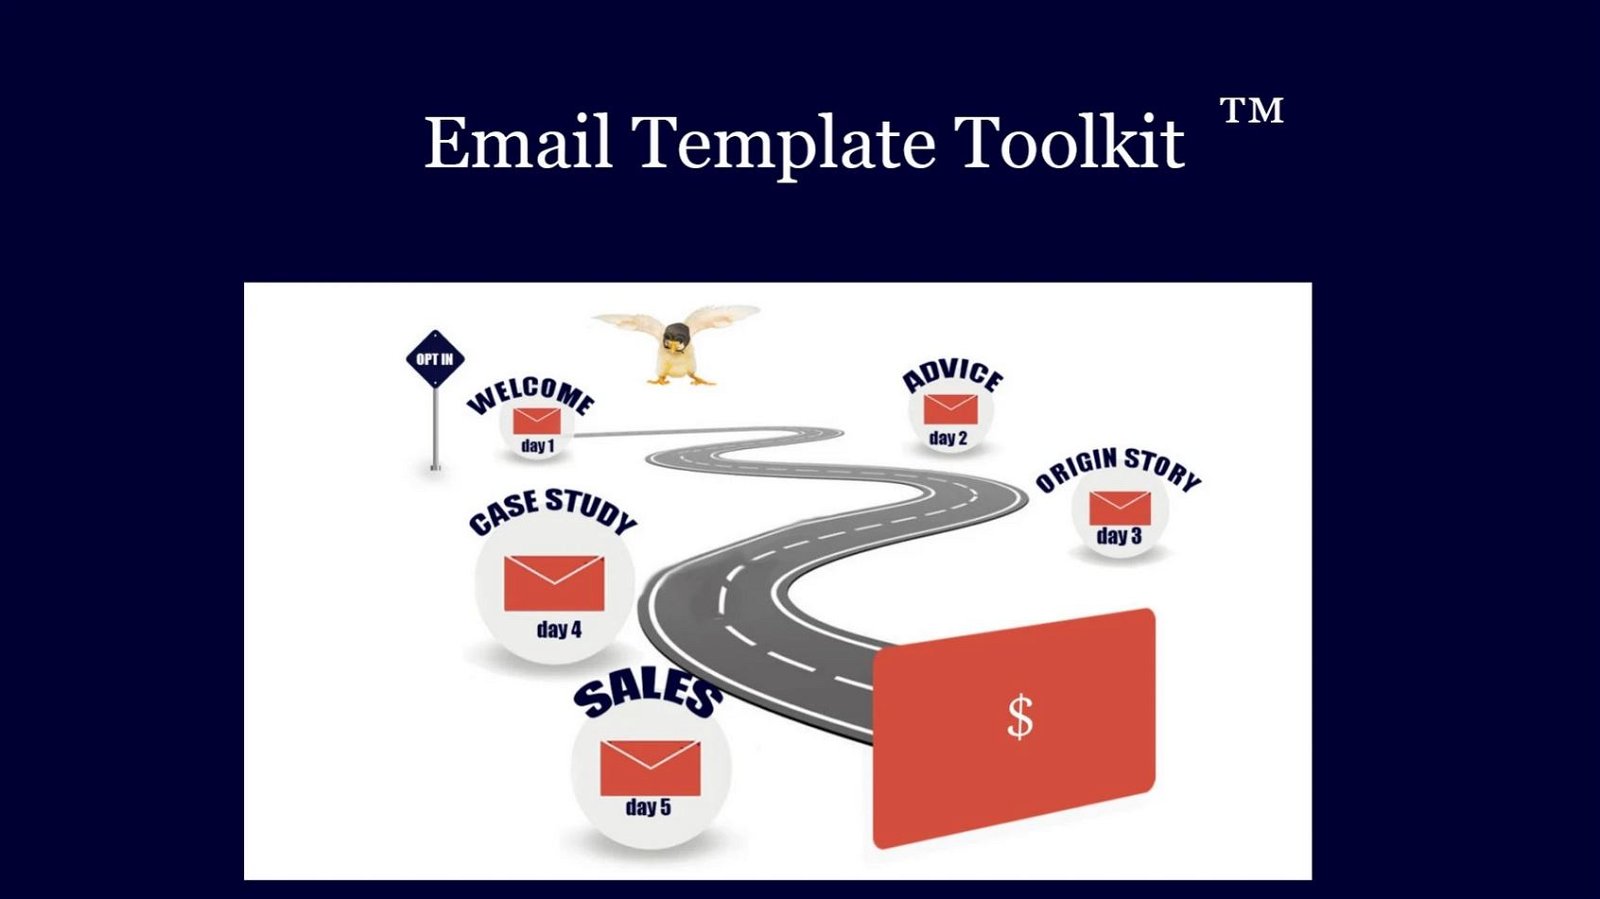 Email Template Toolkit LTD